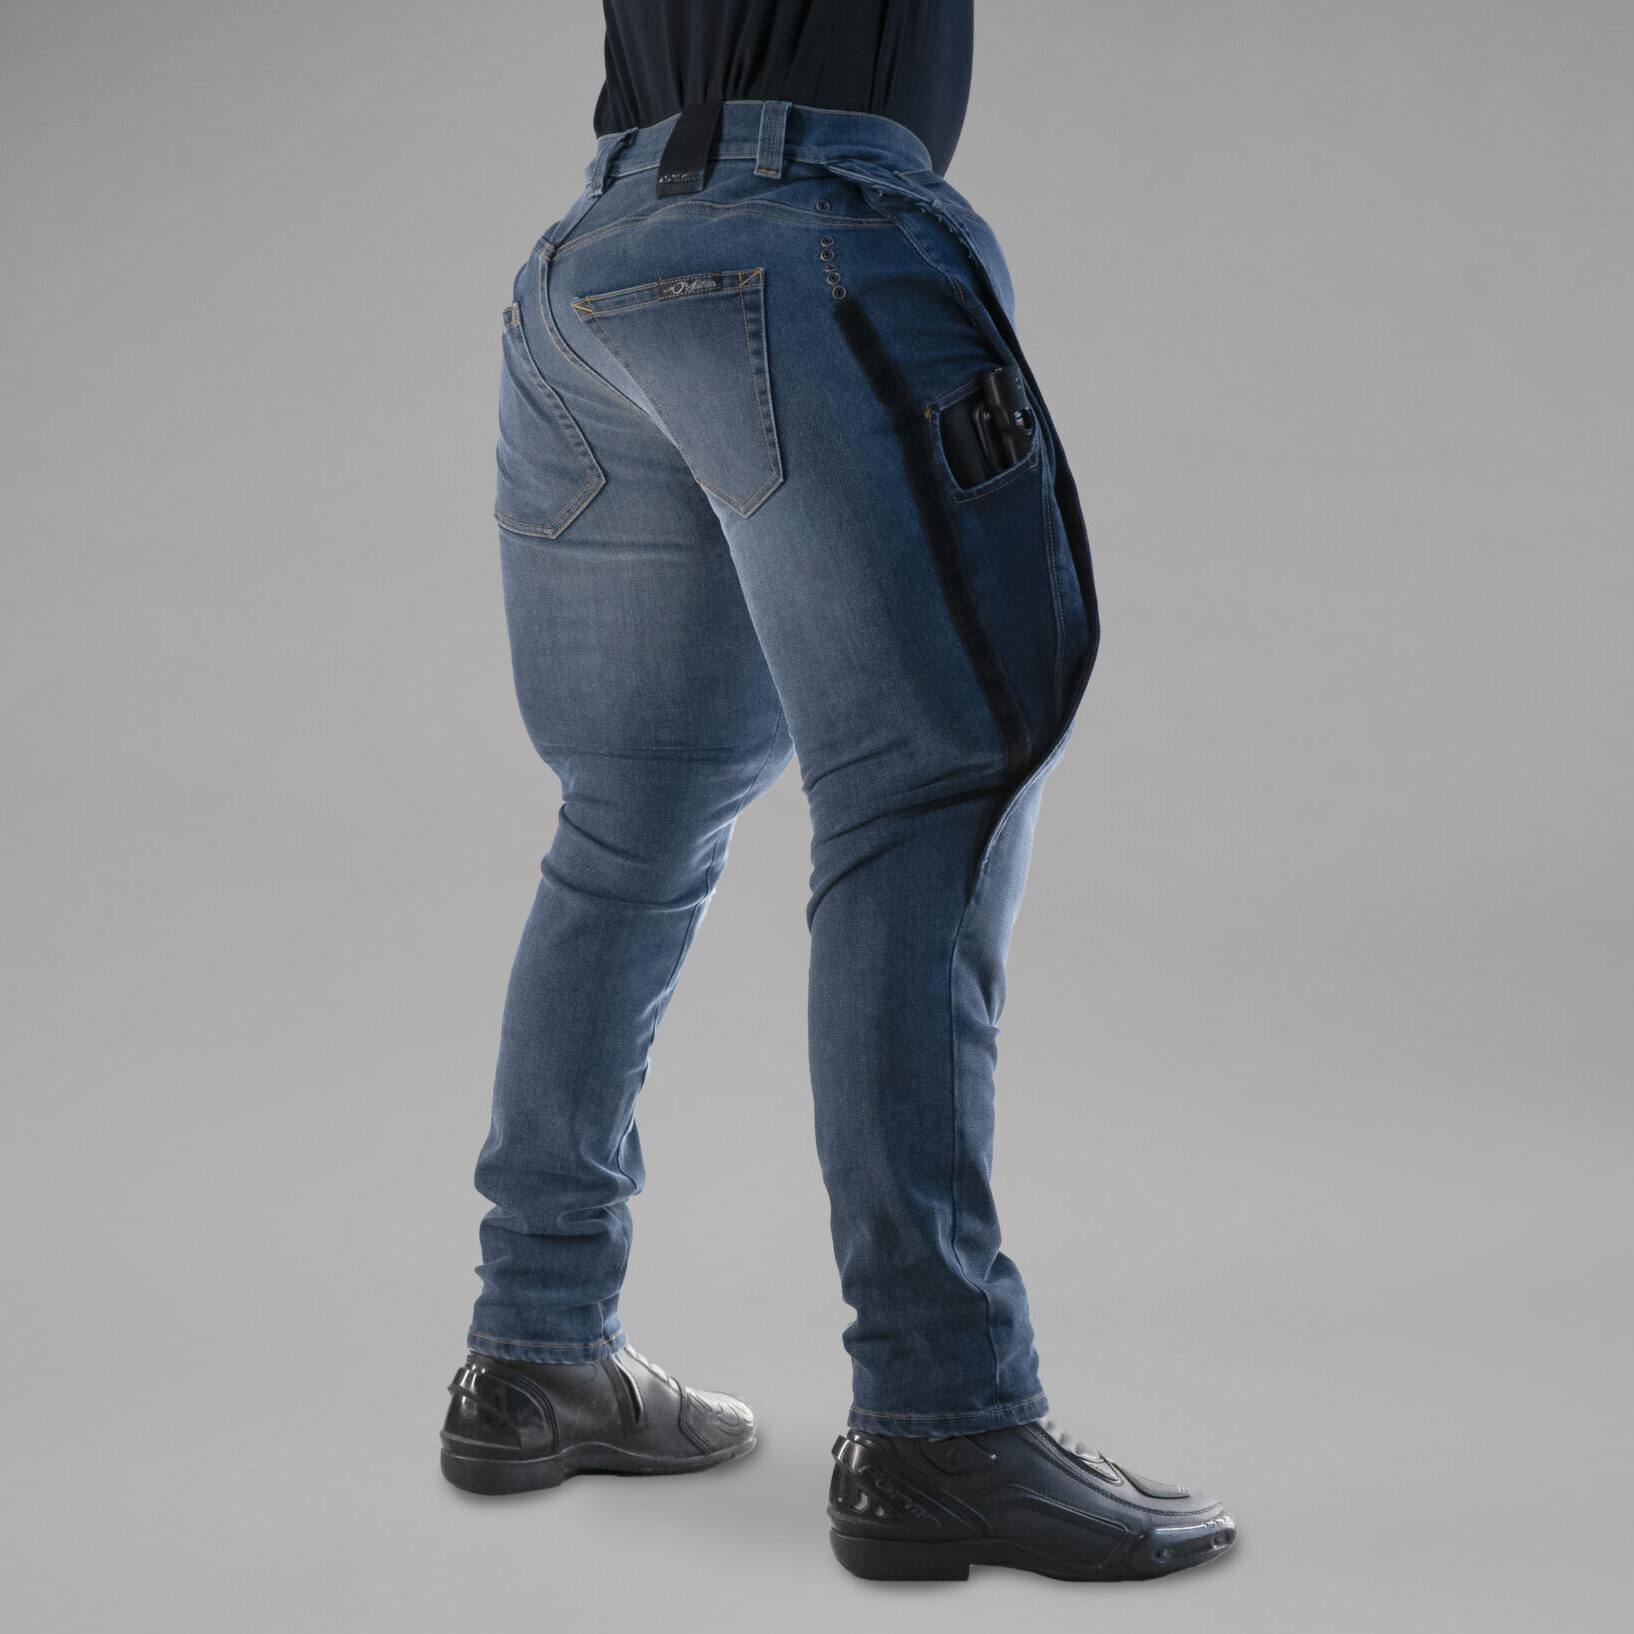 Denim gets a safety upgrade: Introducing motorcycle airbag jeans ...